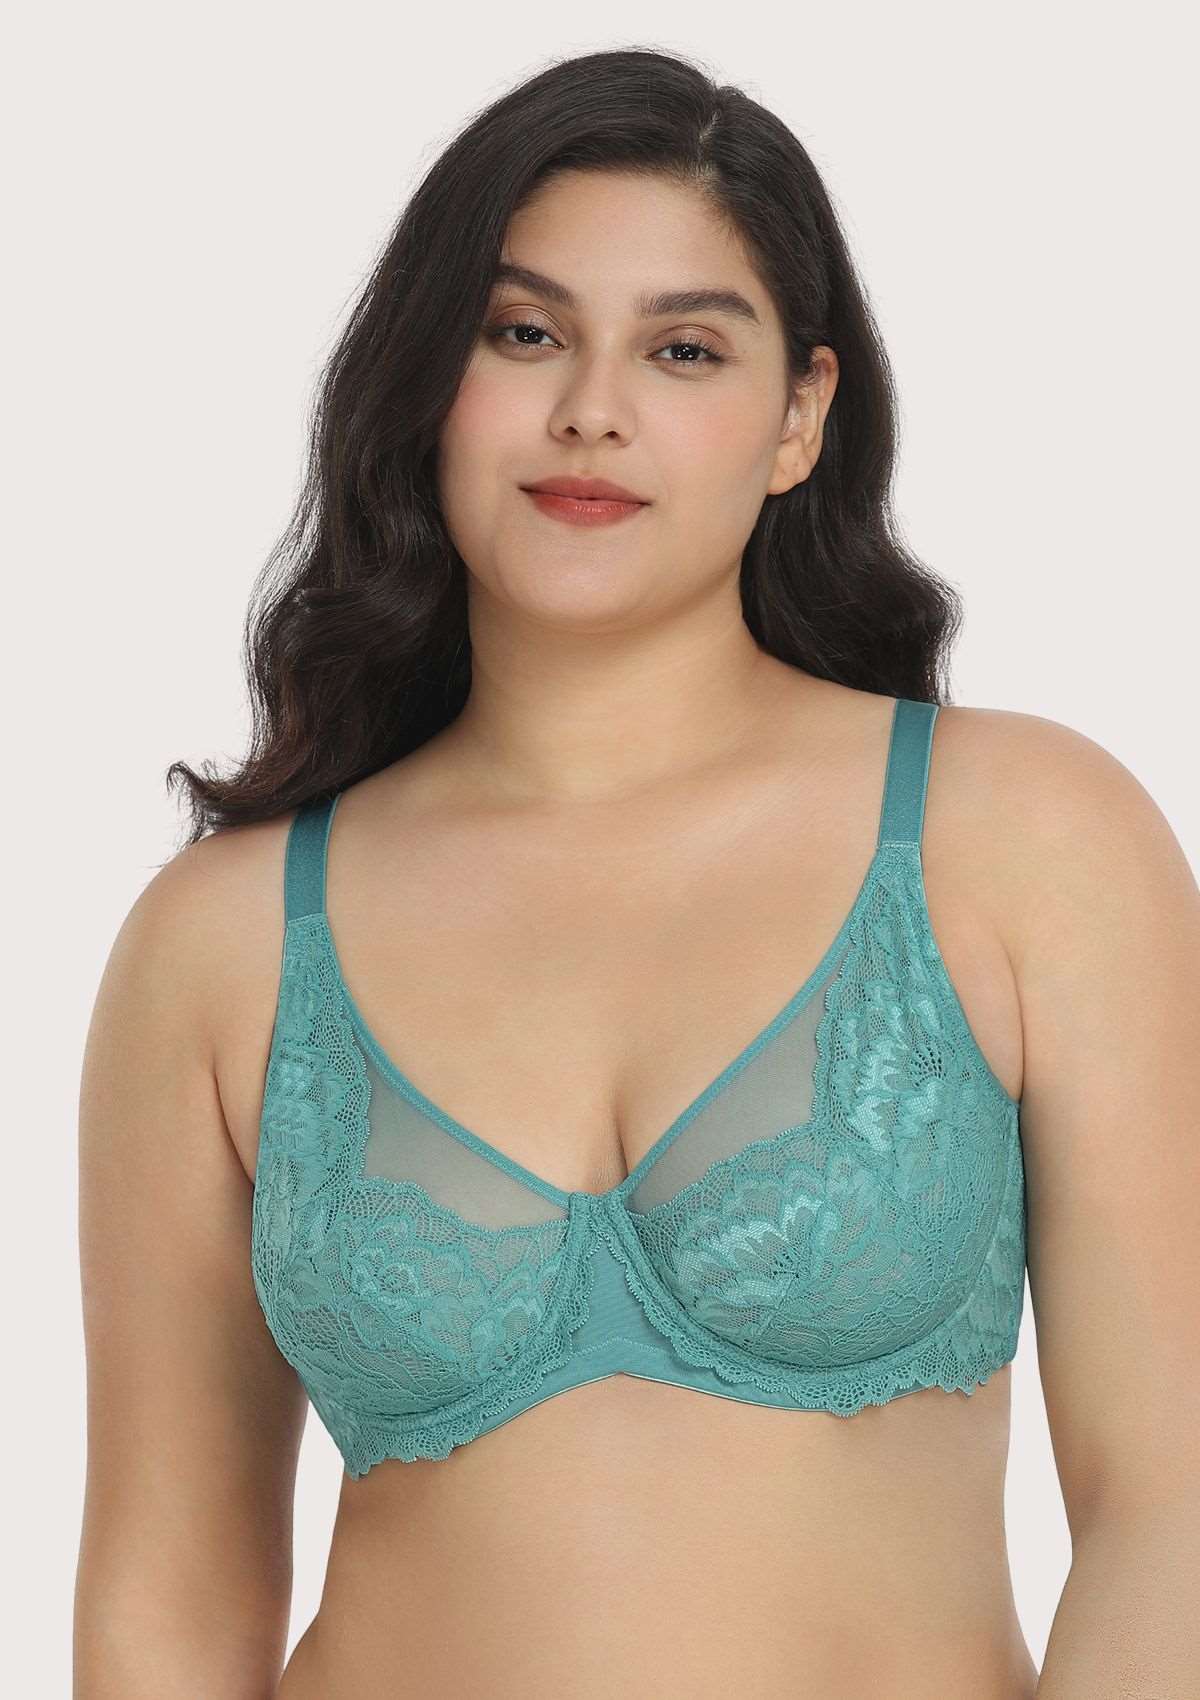 HSIA Paeonia Lace Full Coverage Underwire Non-Padded Uplifting Bra - Teal / 38 / C